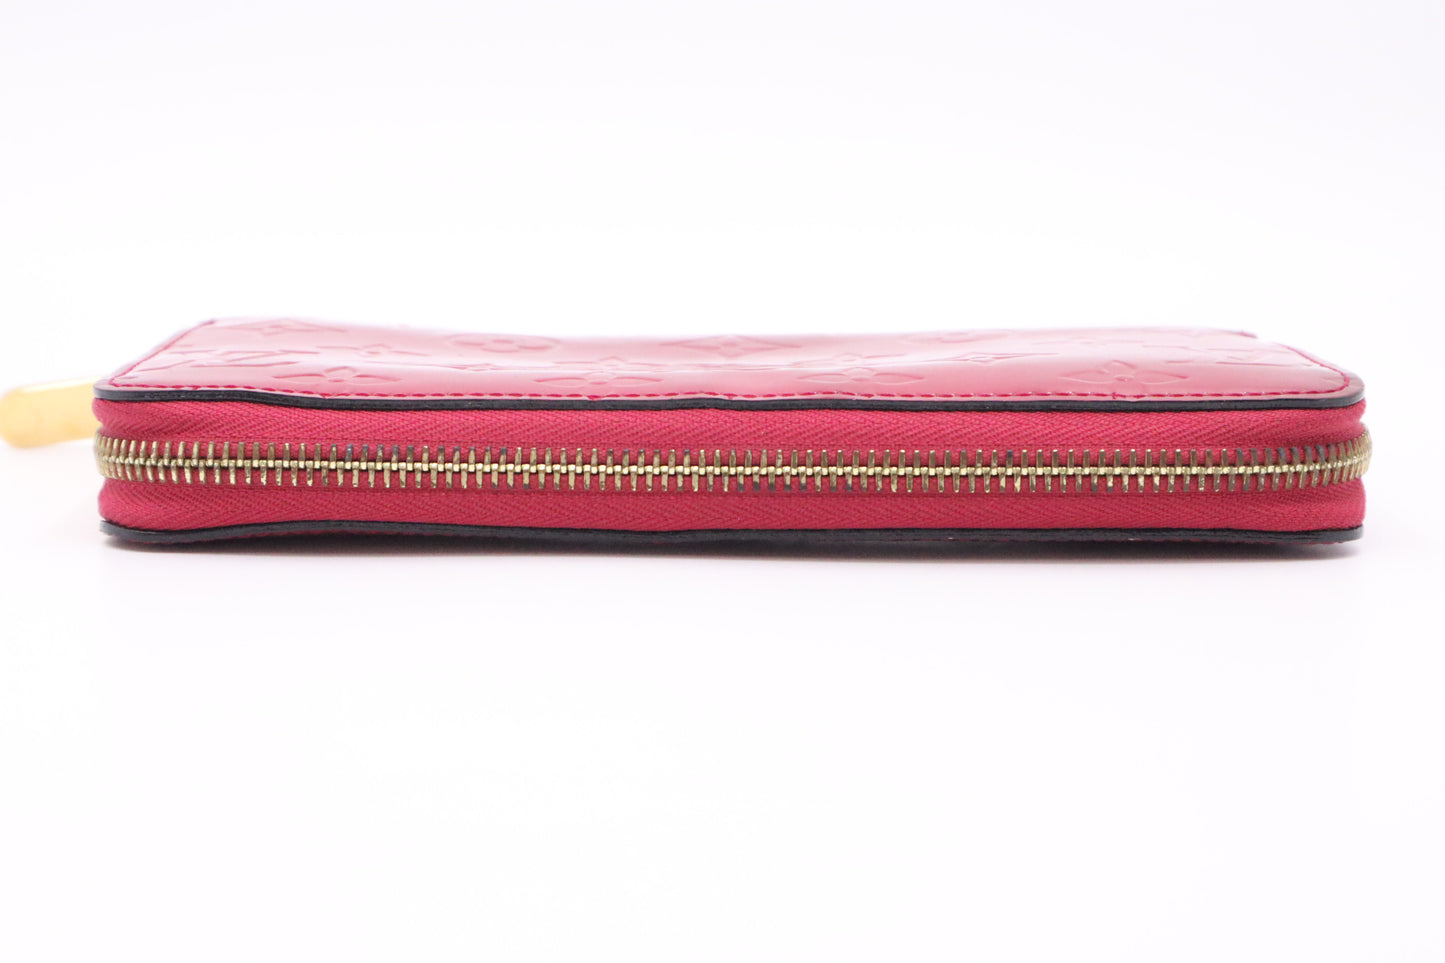 Louis Vuitton Long Zippy Wallet in Indian Rose Vernis Leather